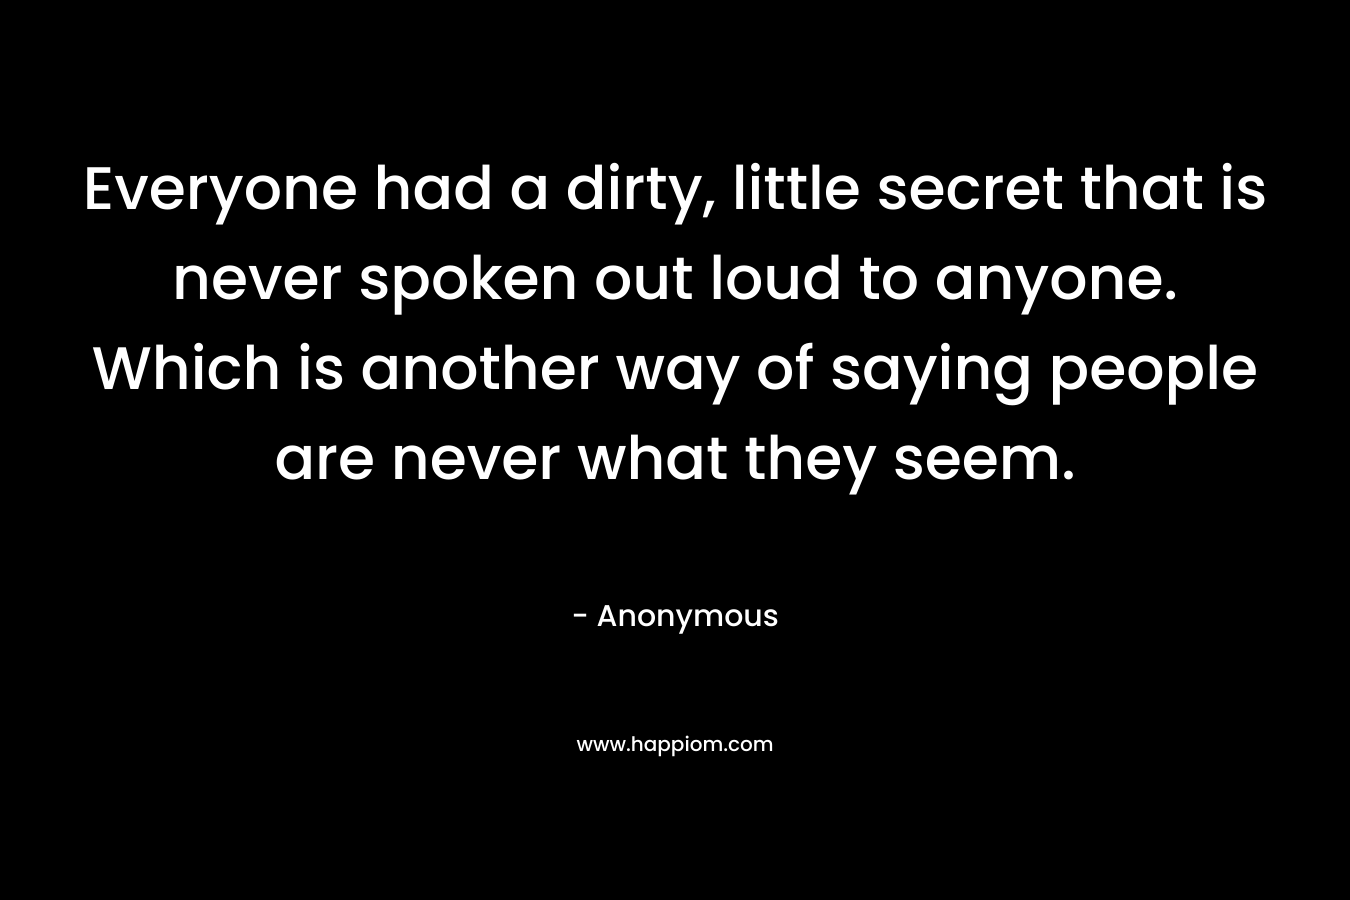 Everyone had a dirty, little secret that is never spoken out loud to anyone. Which is another way of saying people are never what they seem.